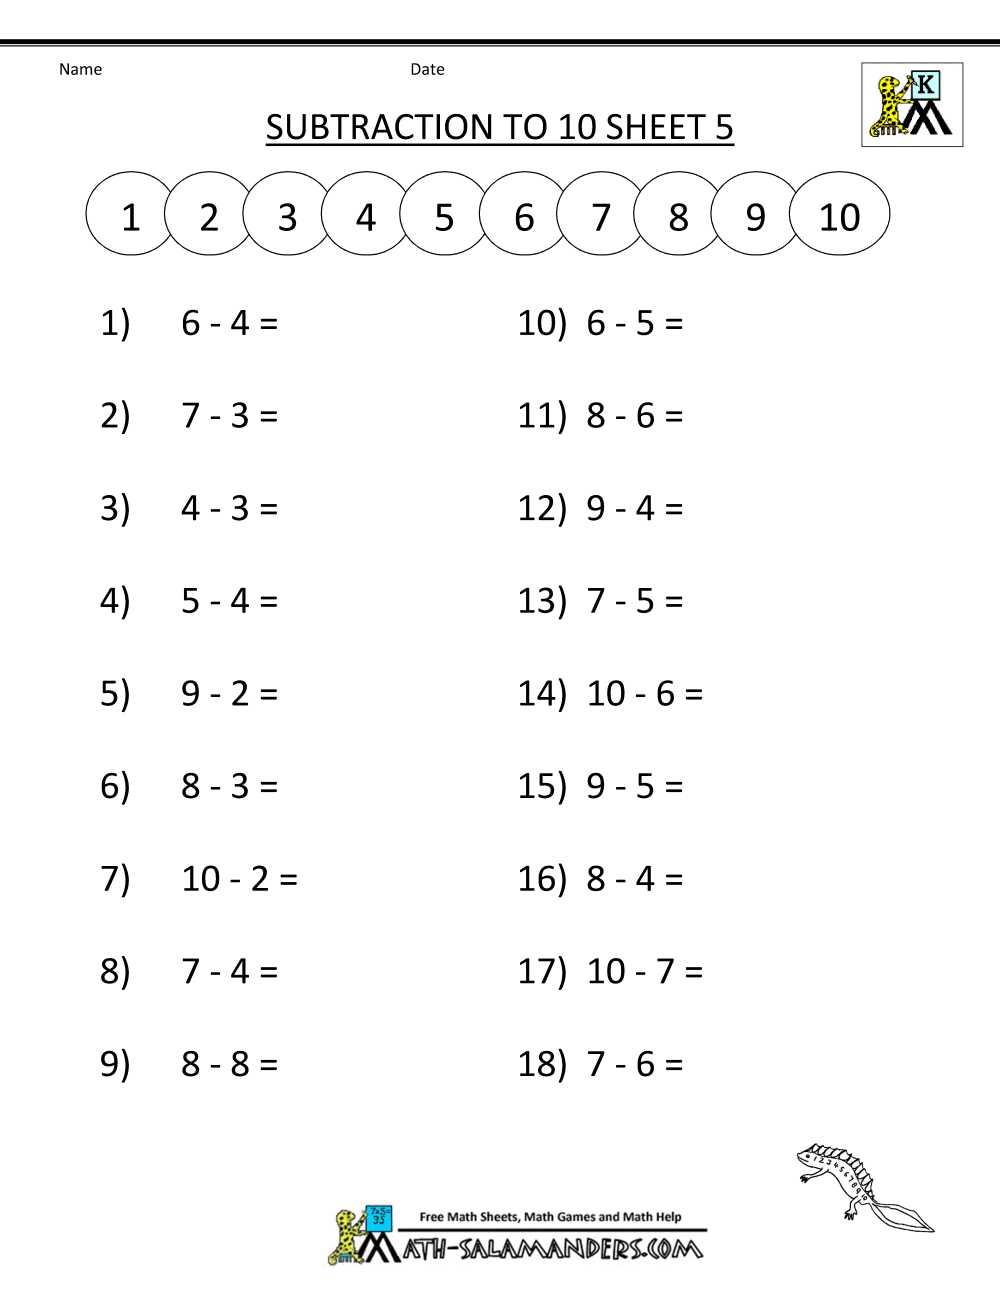 Independent Practice Math Worksheet Answers and Practice Math Worksheets Subtraction to 10 5